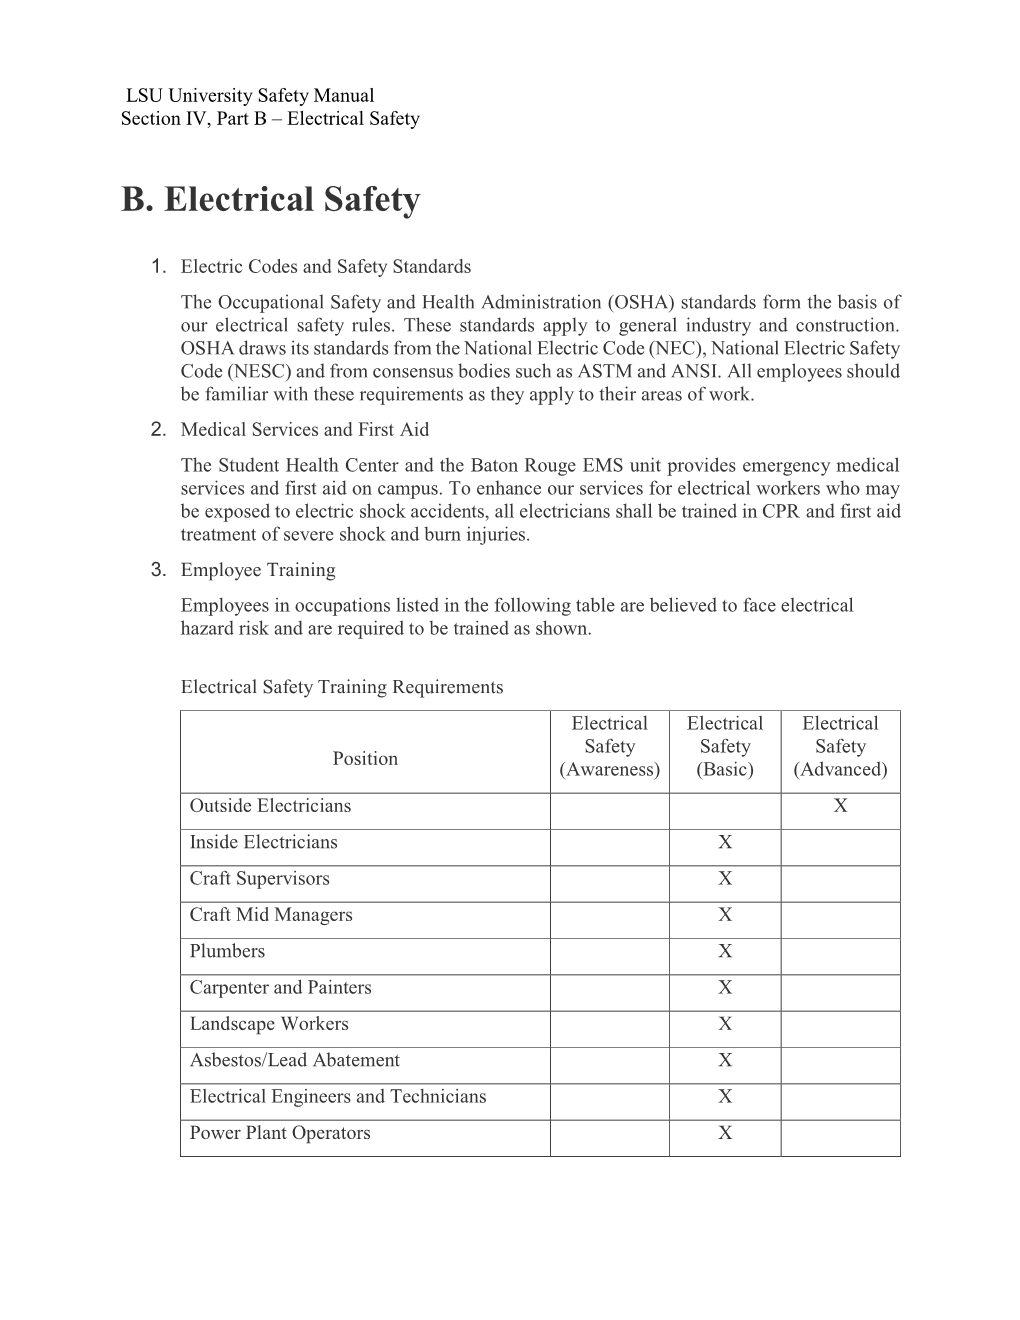 B. Electrical Safety